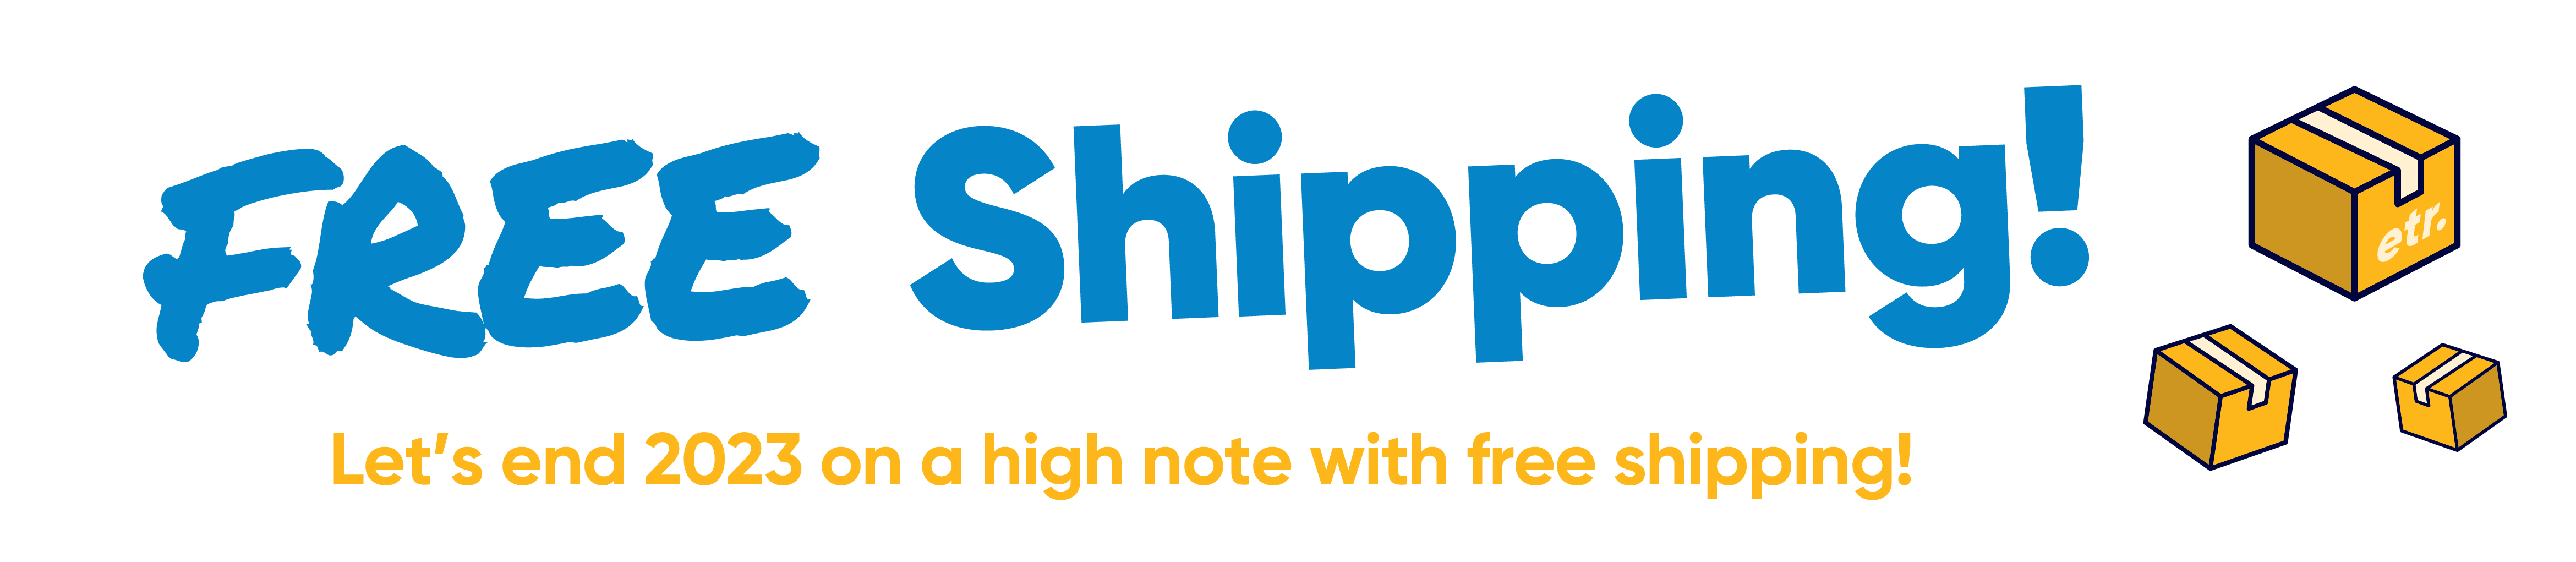 FREE Shipping! Let's end 2023 on a high note with free shipping!